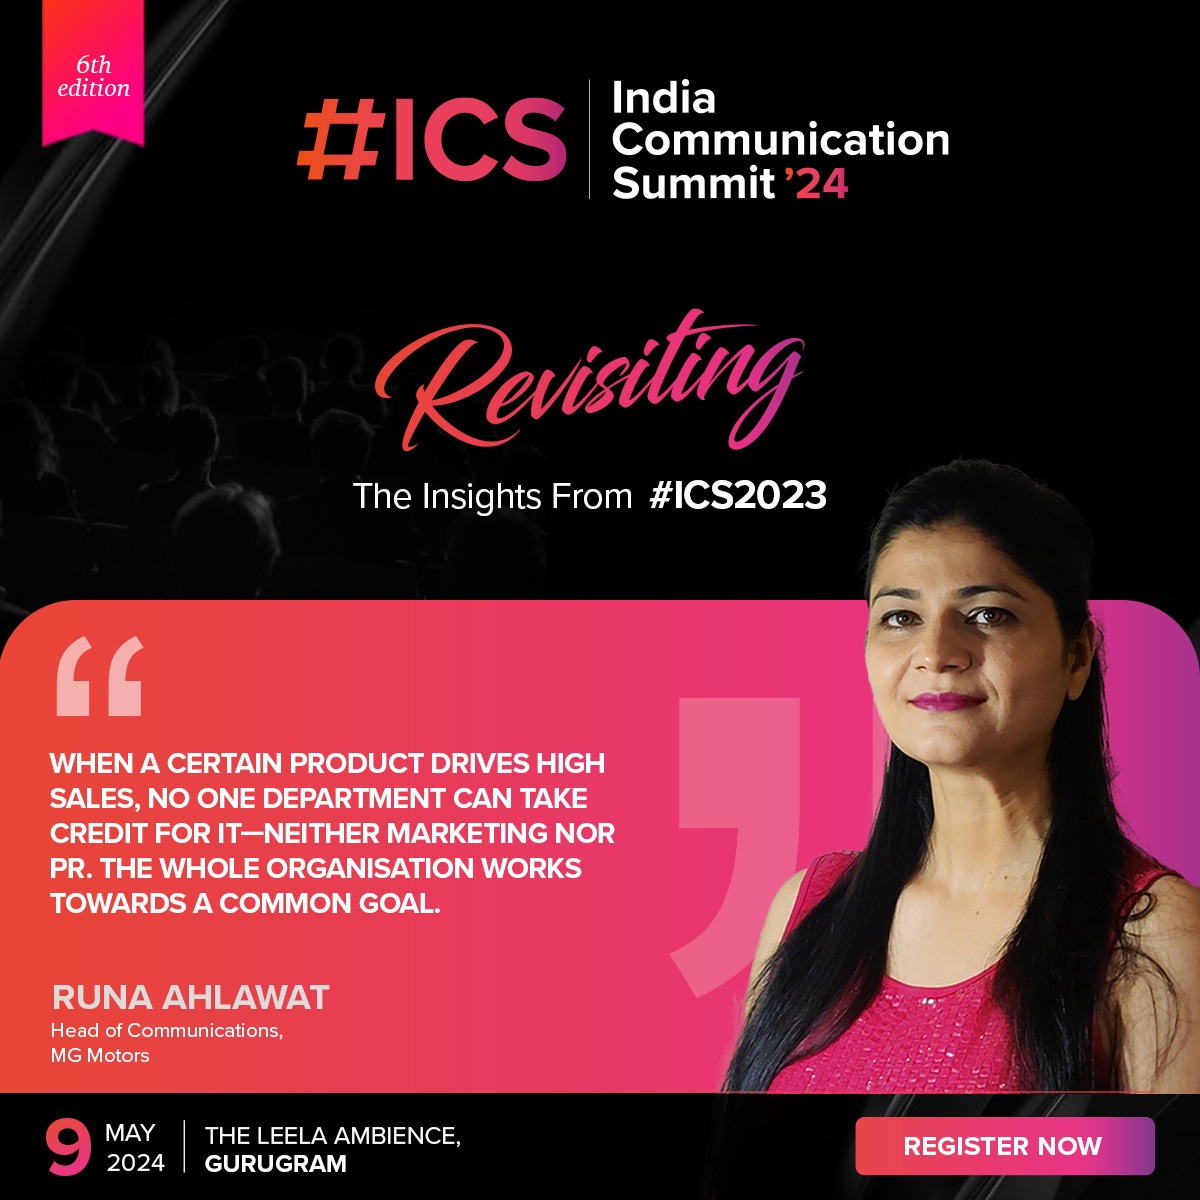 Let's revisit some inspiring quotes from Runa Ahlawat, Head of Communications at MG Motors, from #ETICS 2023 as we gear up for ET ICS 2024.

Register now: bit.ly/49TV4EE

#CommunicationSummit #PR #ReputationManagement #ETICS2024